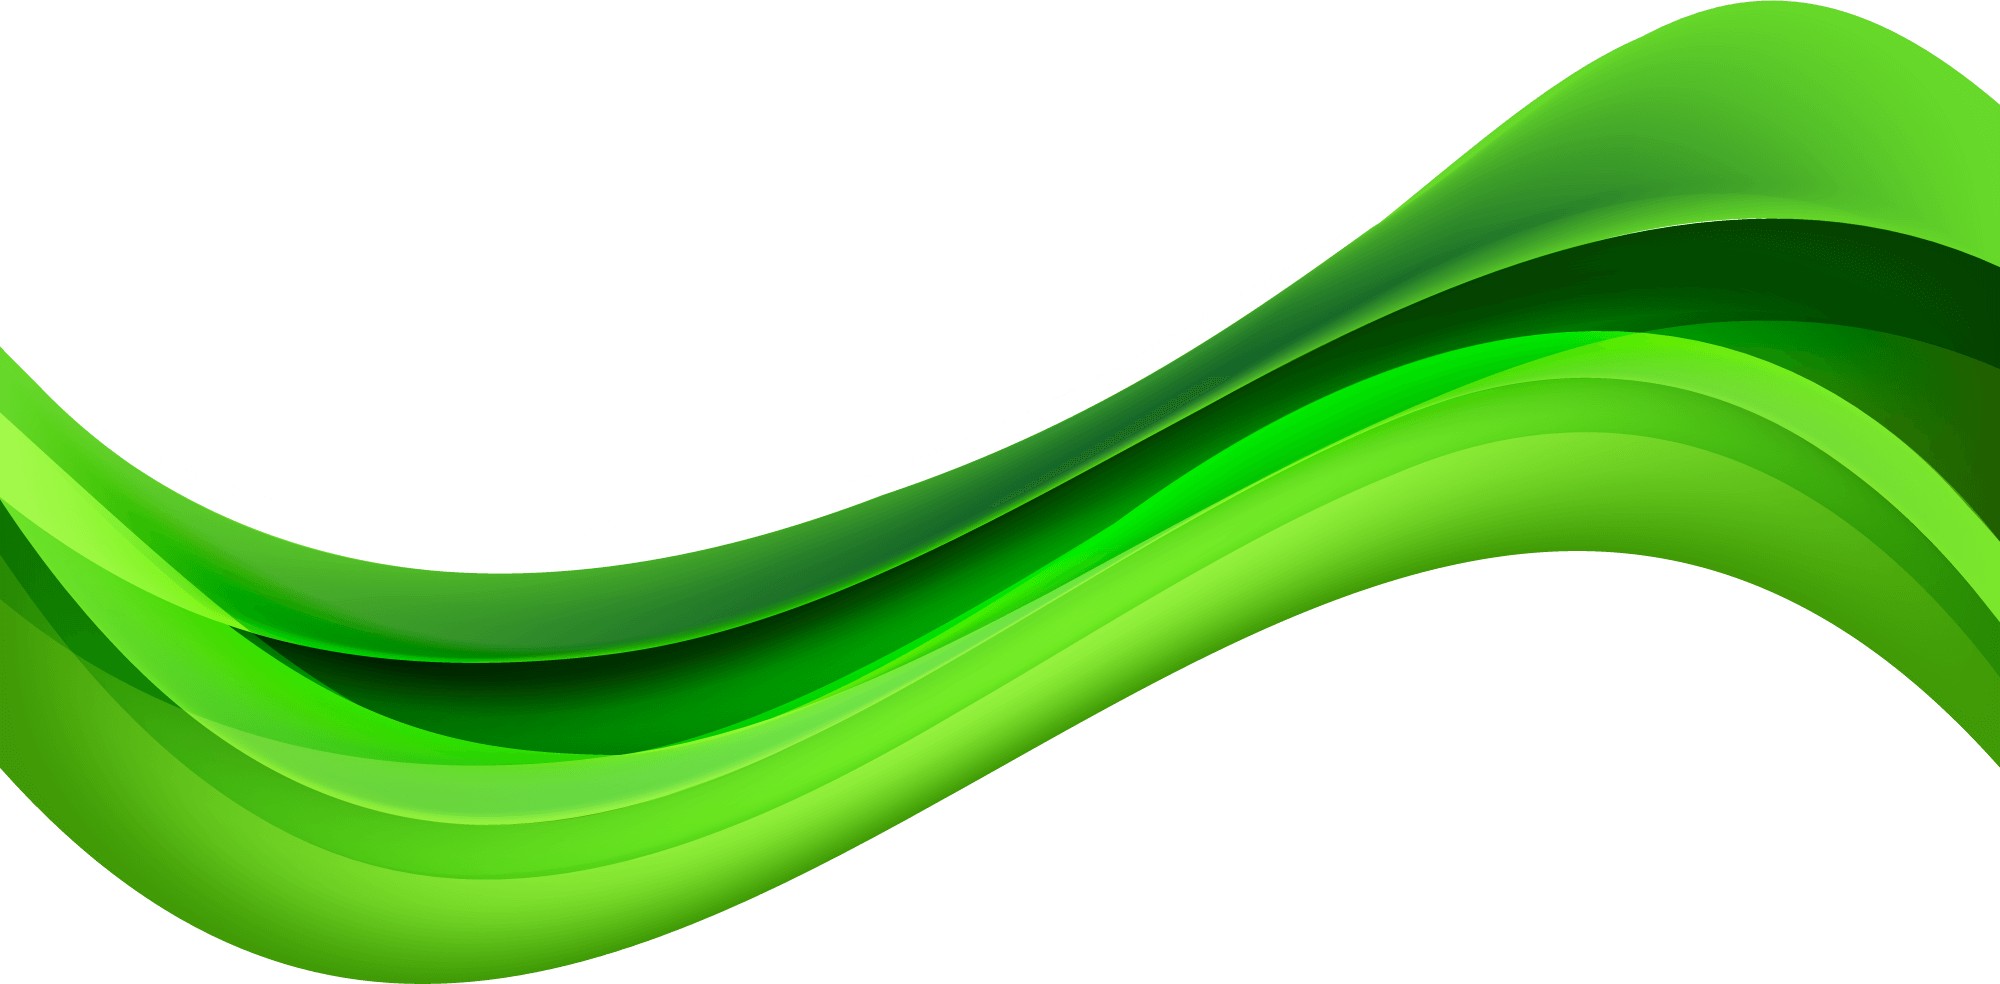 Green wave background - png - Pngfreepic - vector - clipart - png - shape